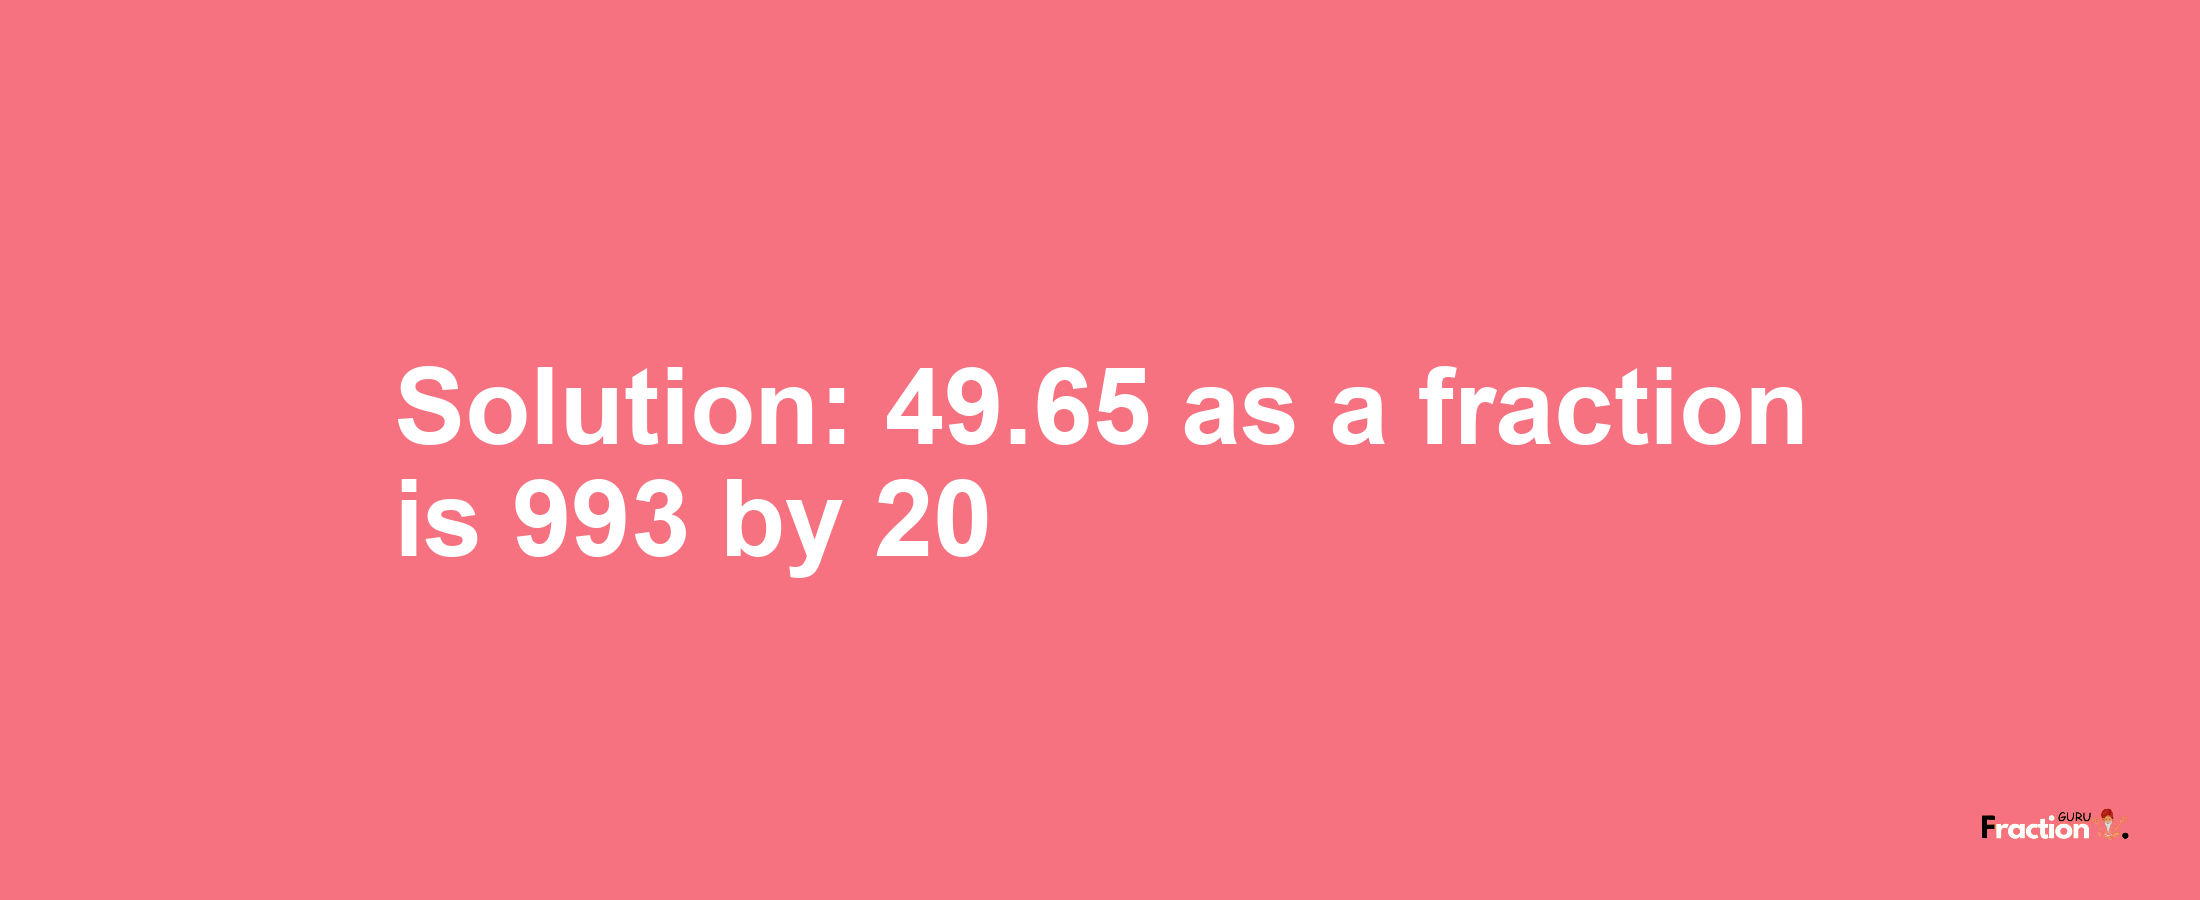 Solution:49.65 as a fraction is 993/20